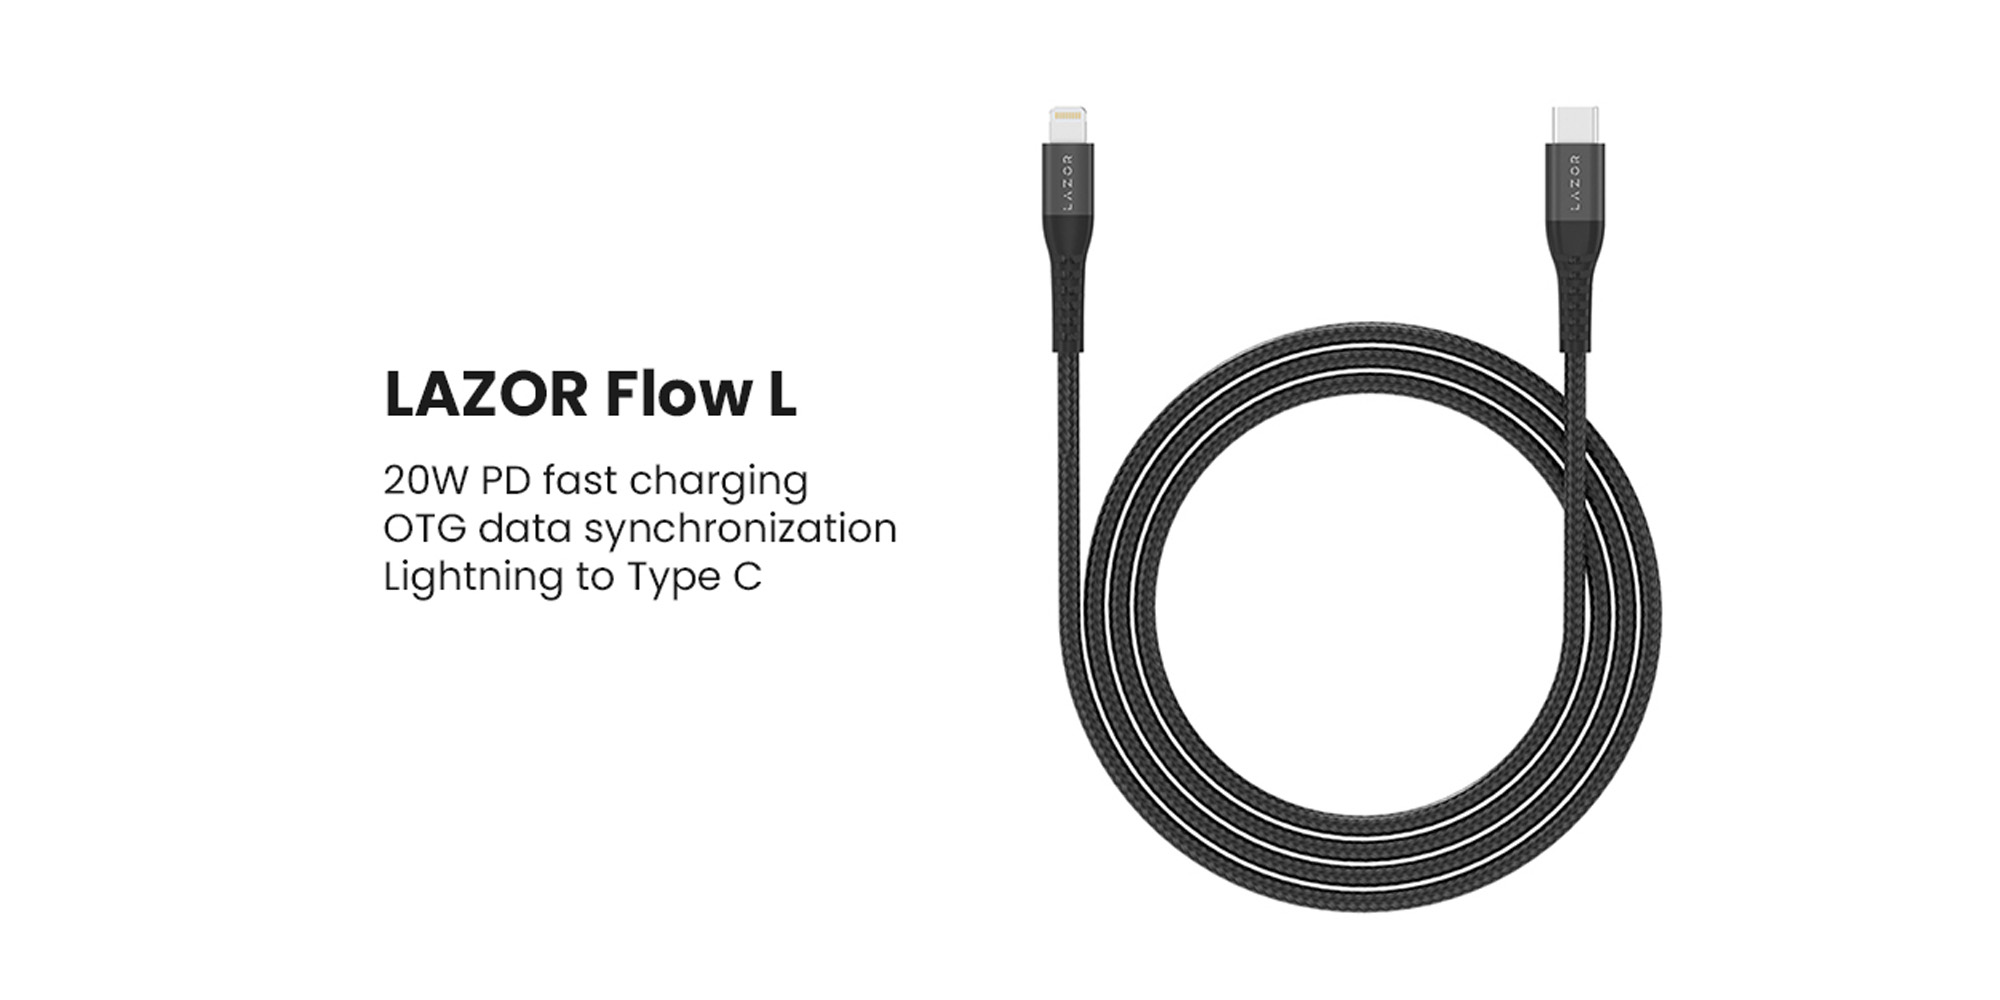 LAZOR Flow L CL90: Type-C to Lightning 20W PD Fast Charging Cable, OTG Data Synchronization, Flexible TPE Material - 3M, Black